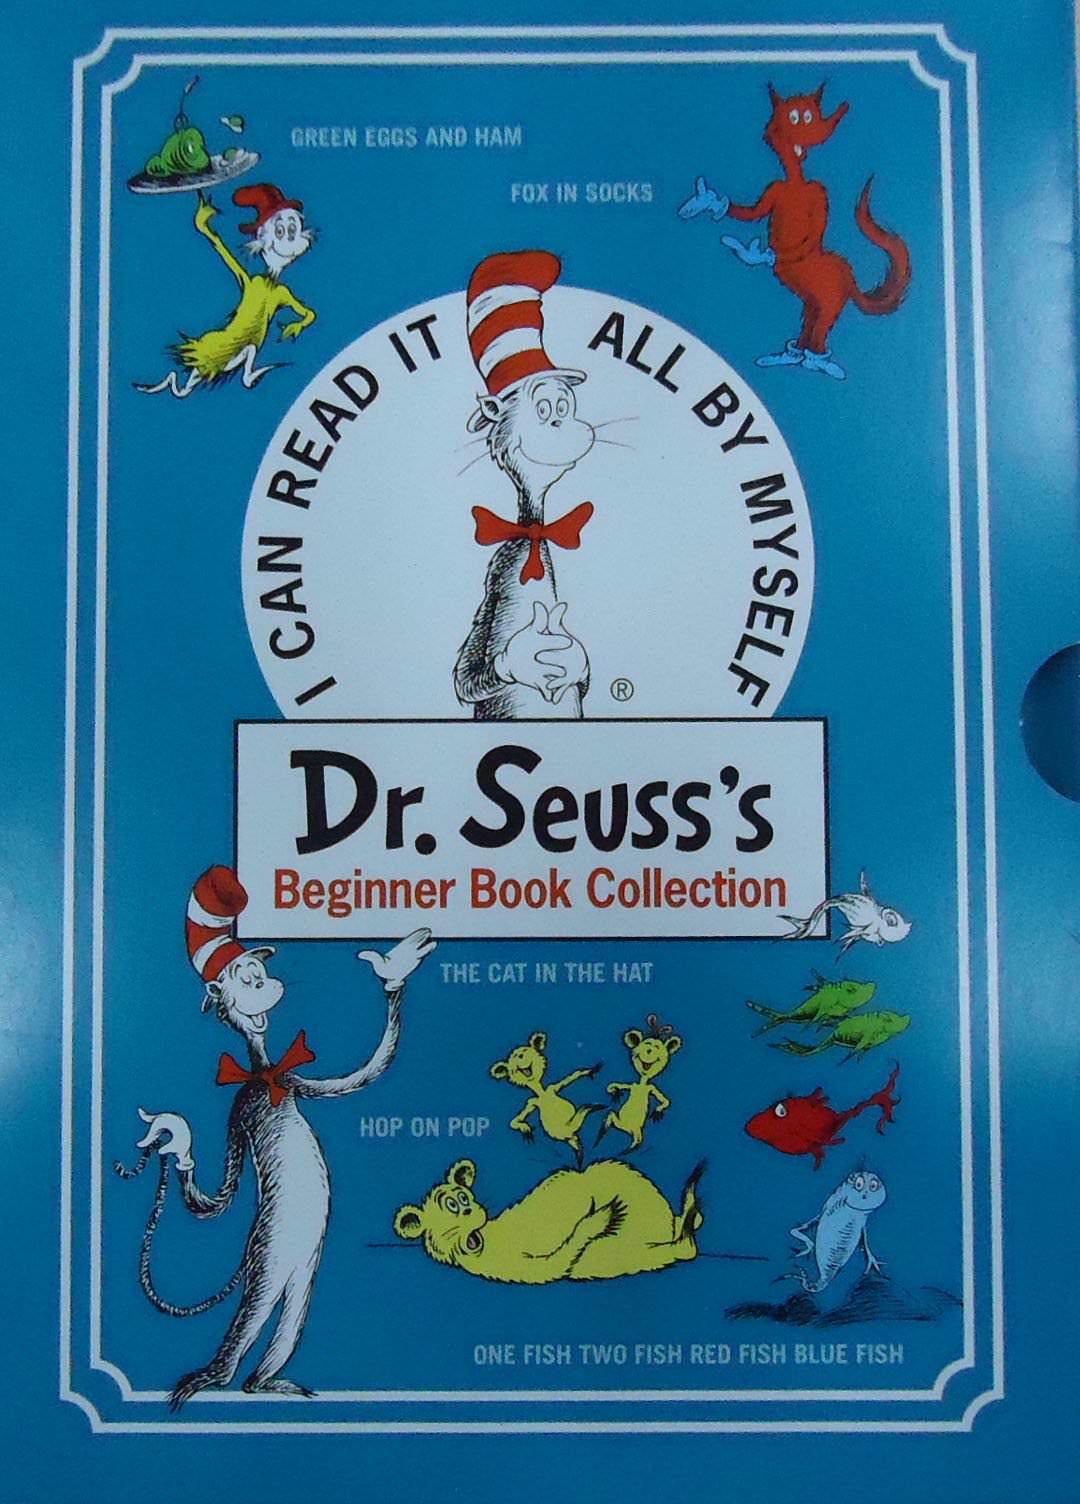 Dr. Seuss's Beginner Book Collection : Cat in the Hat, One Fish Two Fish, Green Eggs and Ham, Hop on Pop, Fox in Socks - by Dr. Seuss